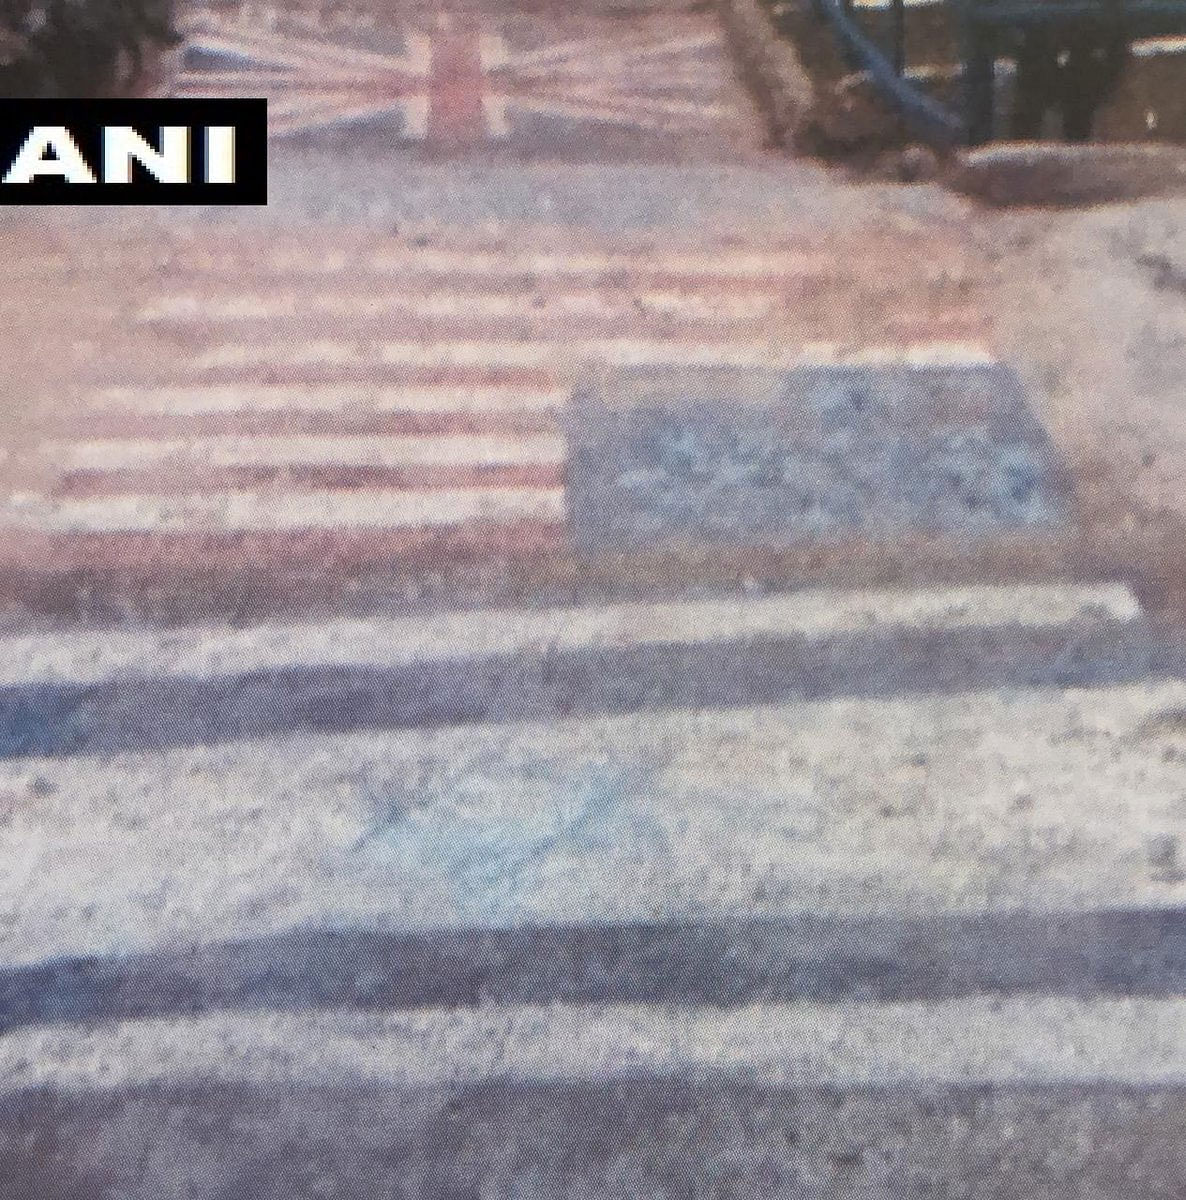 Intel Sources: Flags of USA, UK and Israel painted on staircases seen in Jaish e Mohammed facility destroyed by Indian Air Force jets in Balakot